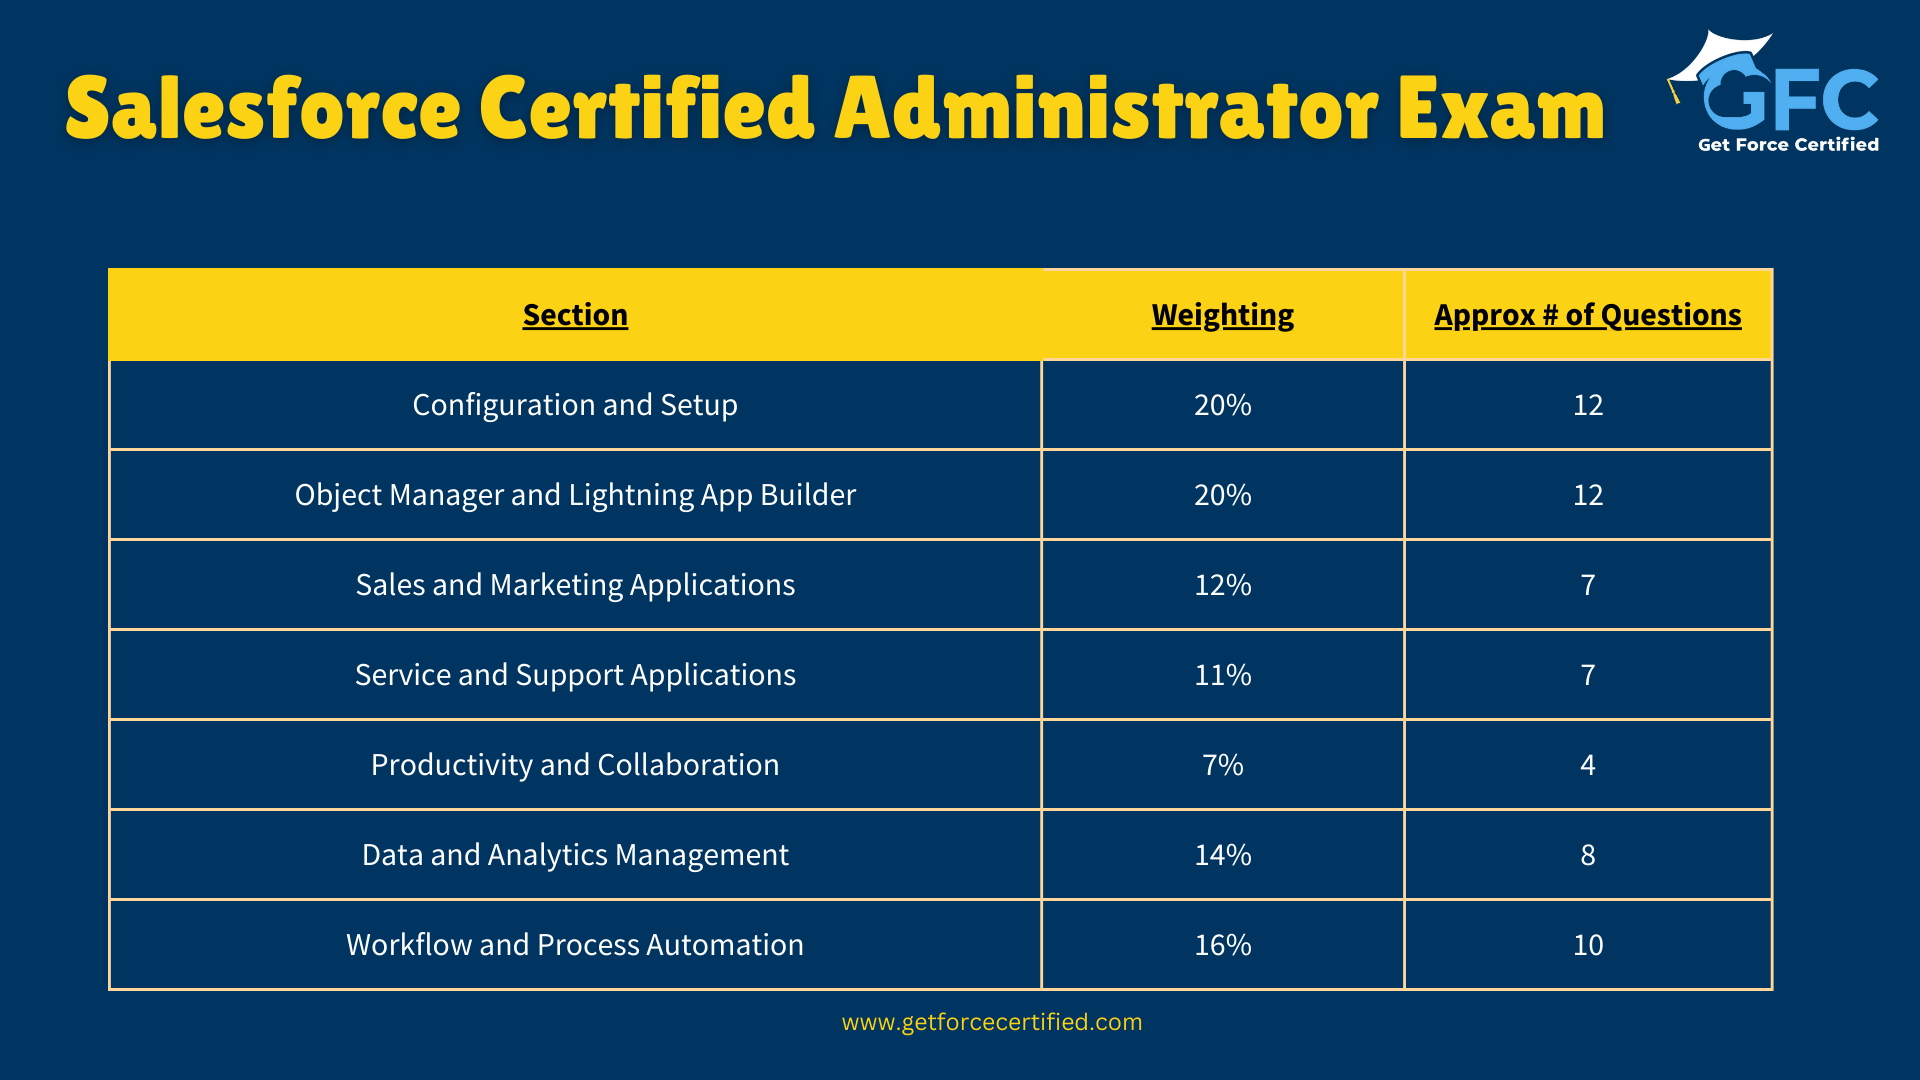 Salesforce Certified Administrator Exam Guide - Section by Section